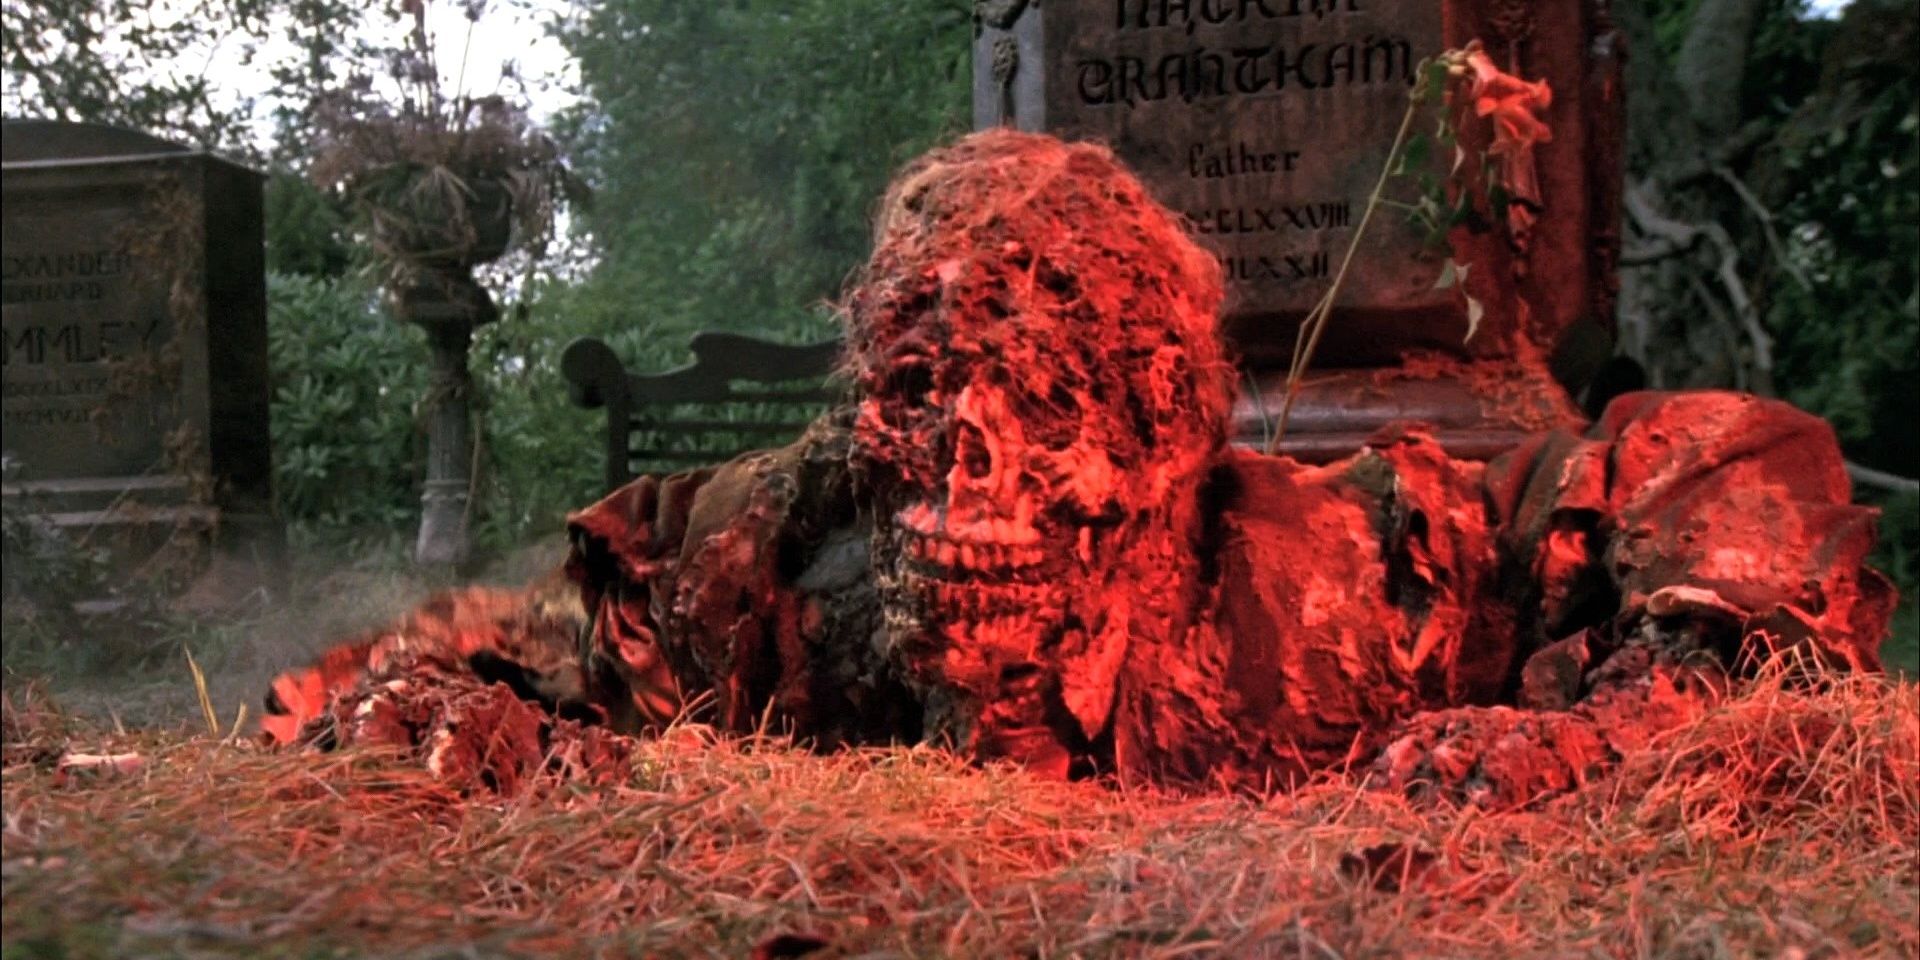 Creepshow 3 streaming: where to watch movie online?